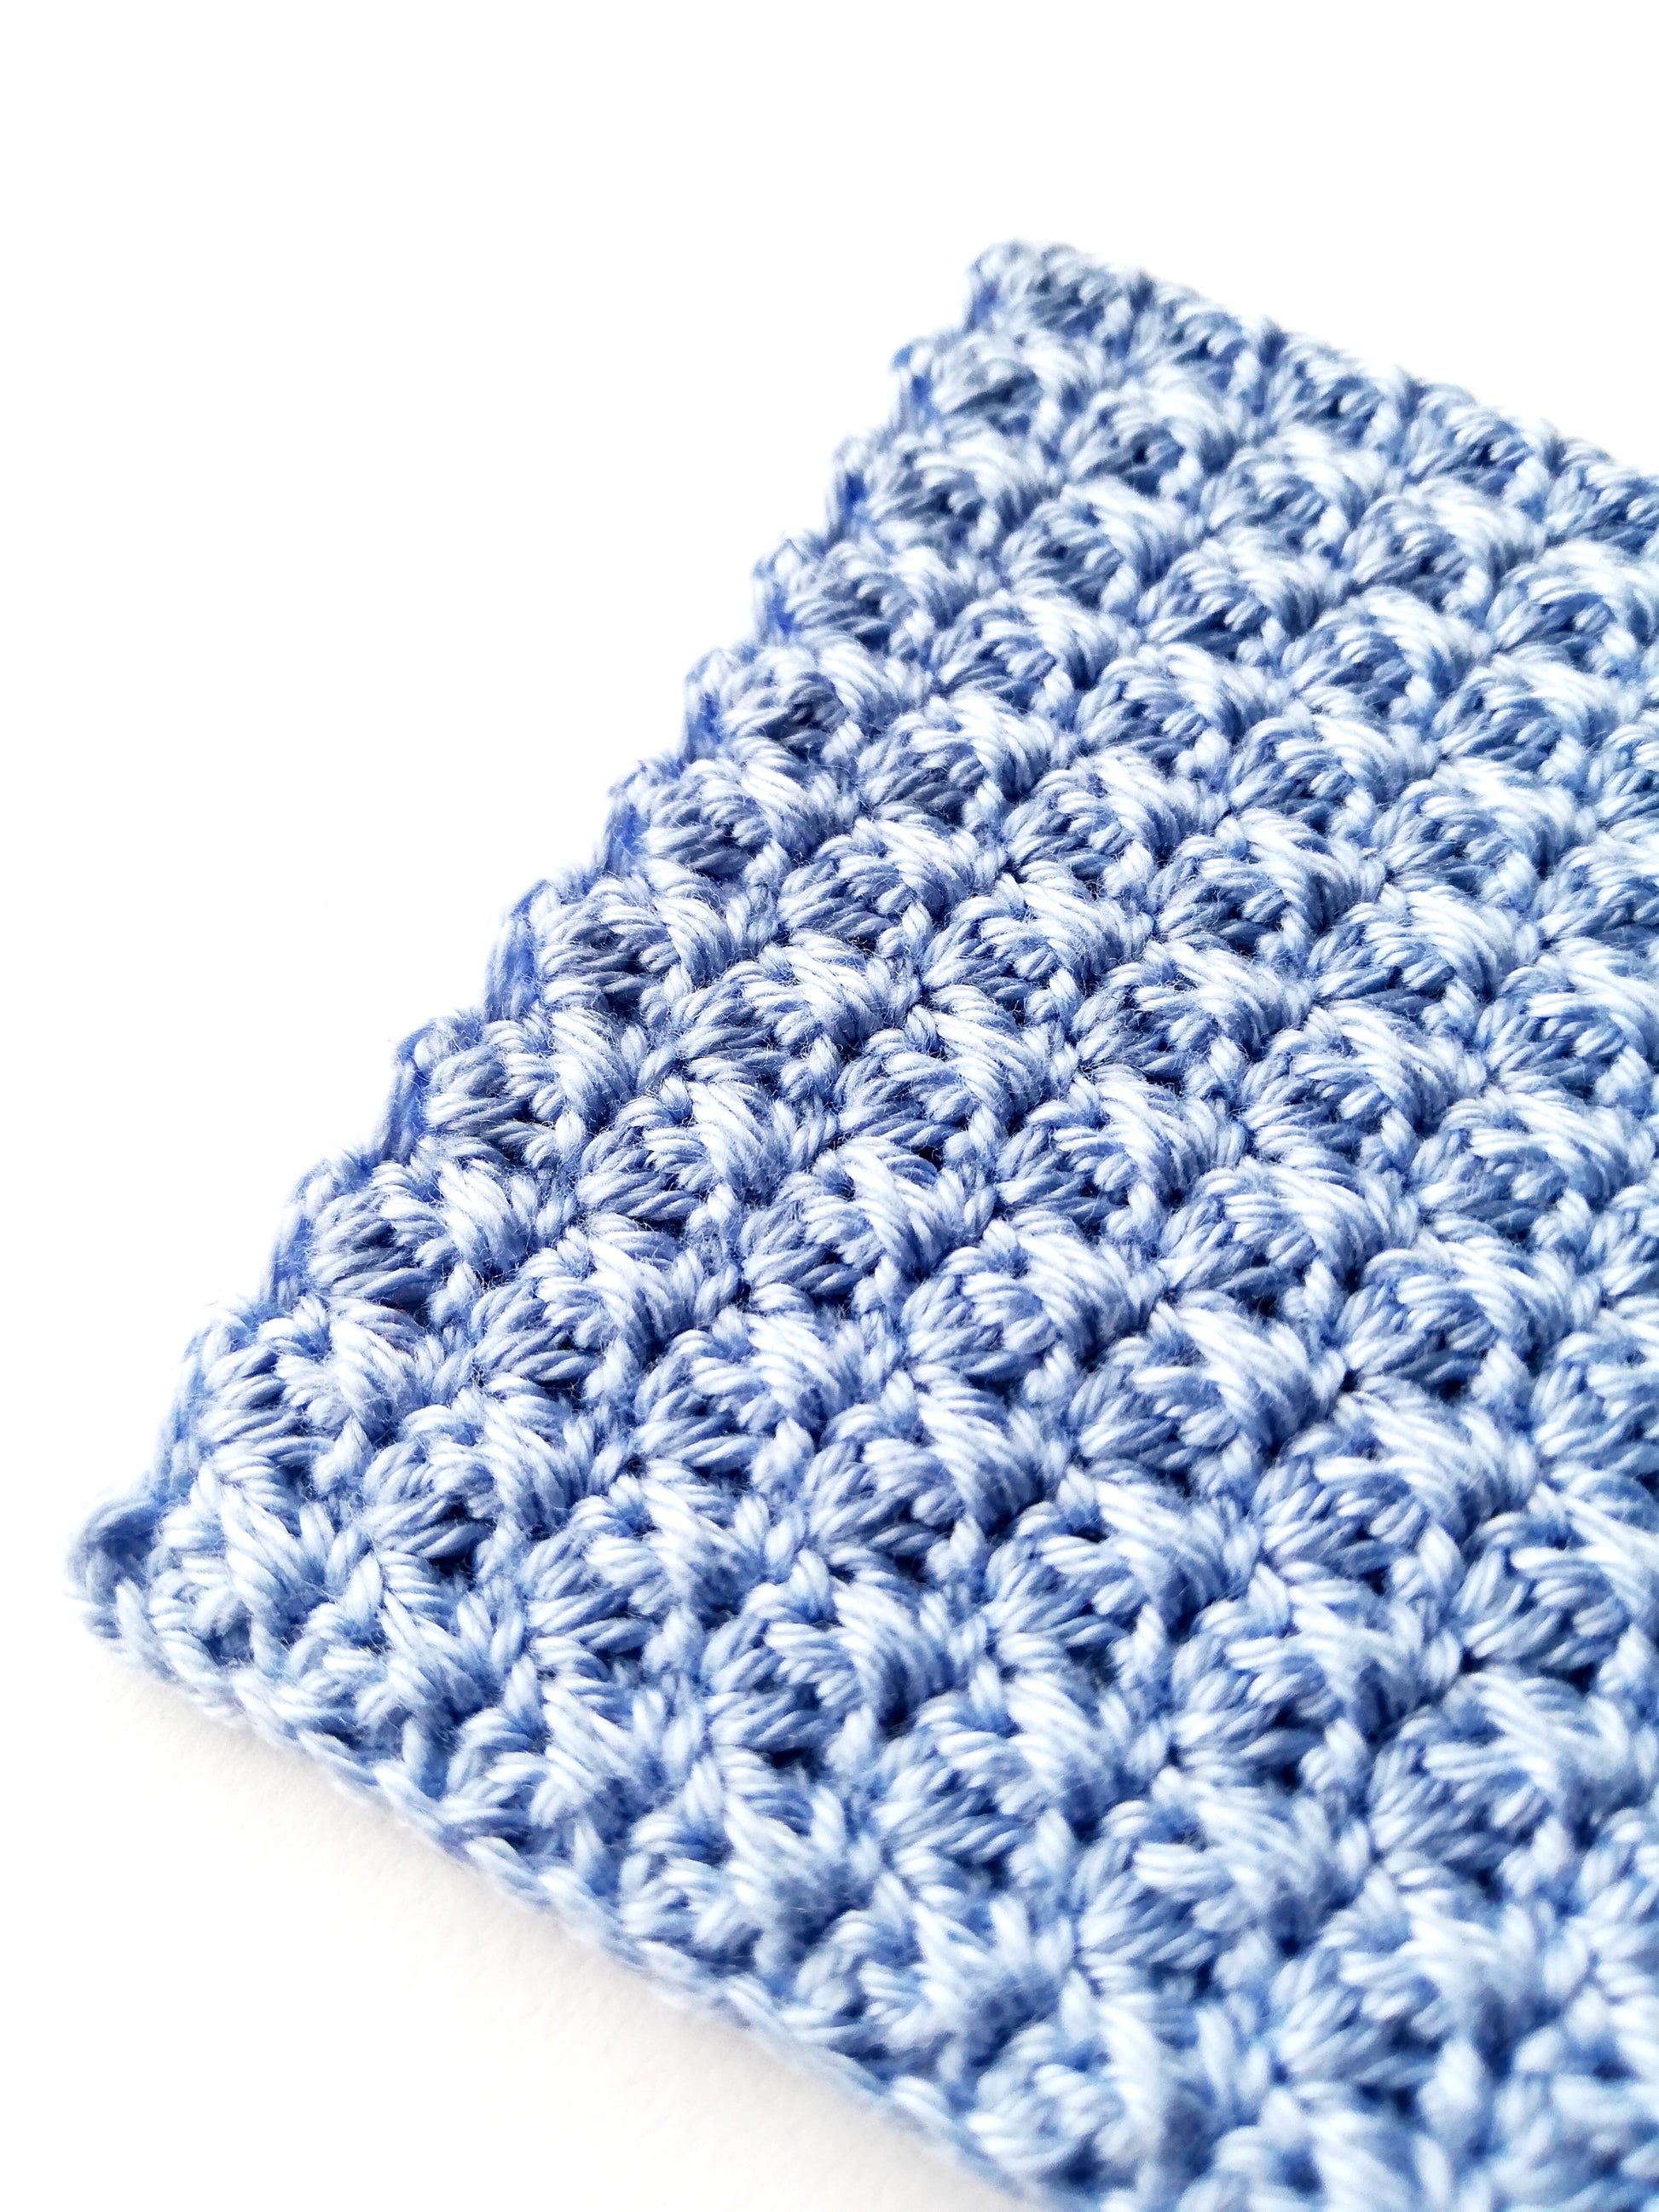 Crochet Pattern: Little Dots Coaster (+17 More Crochet and Knitting  Patterns for Winter White Décor) - Underground Crafter